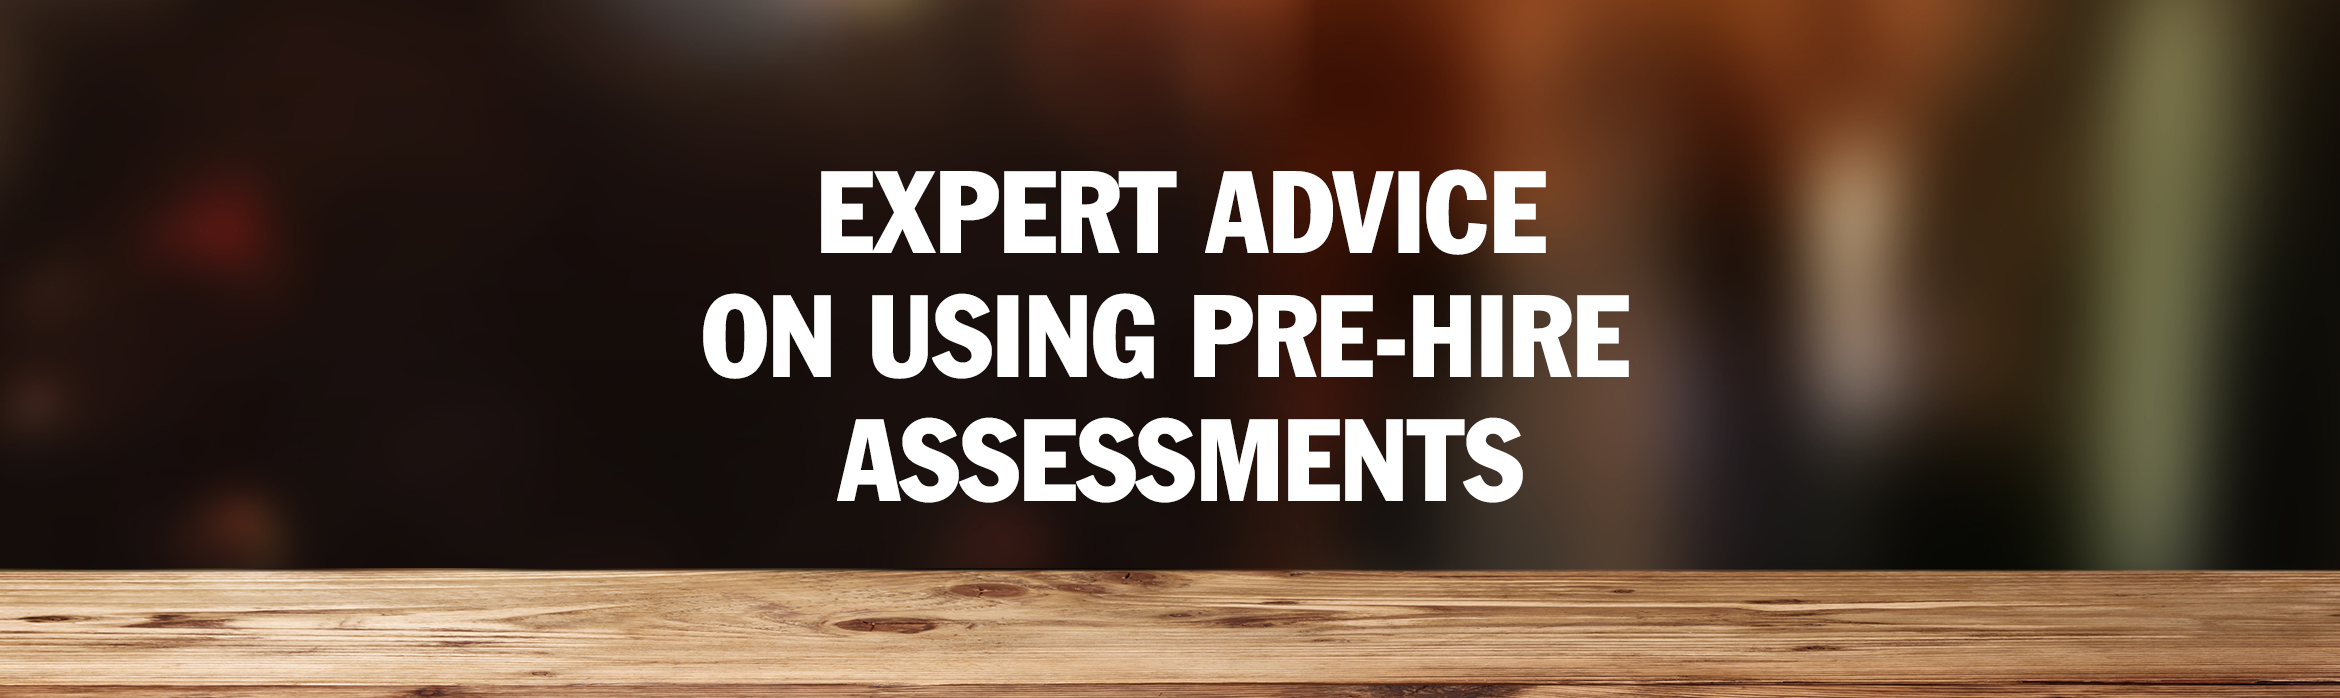 Expert Advice on Using Pre-Hire Assessments